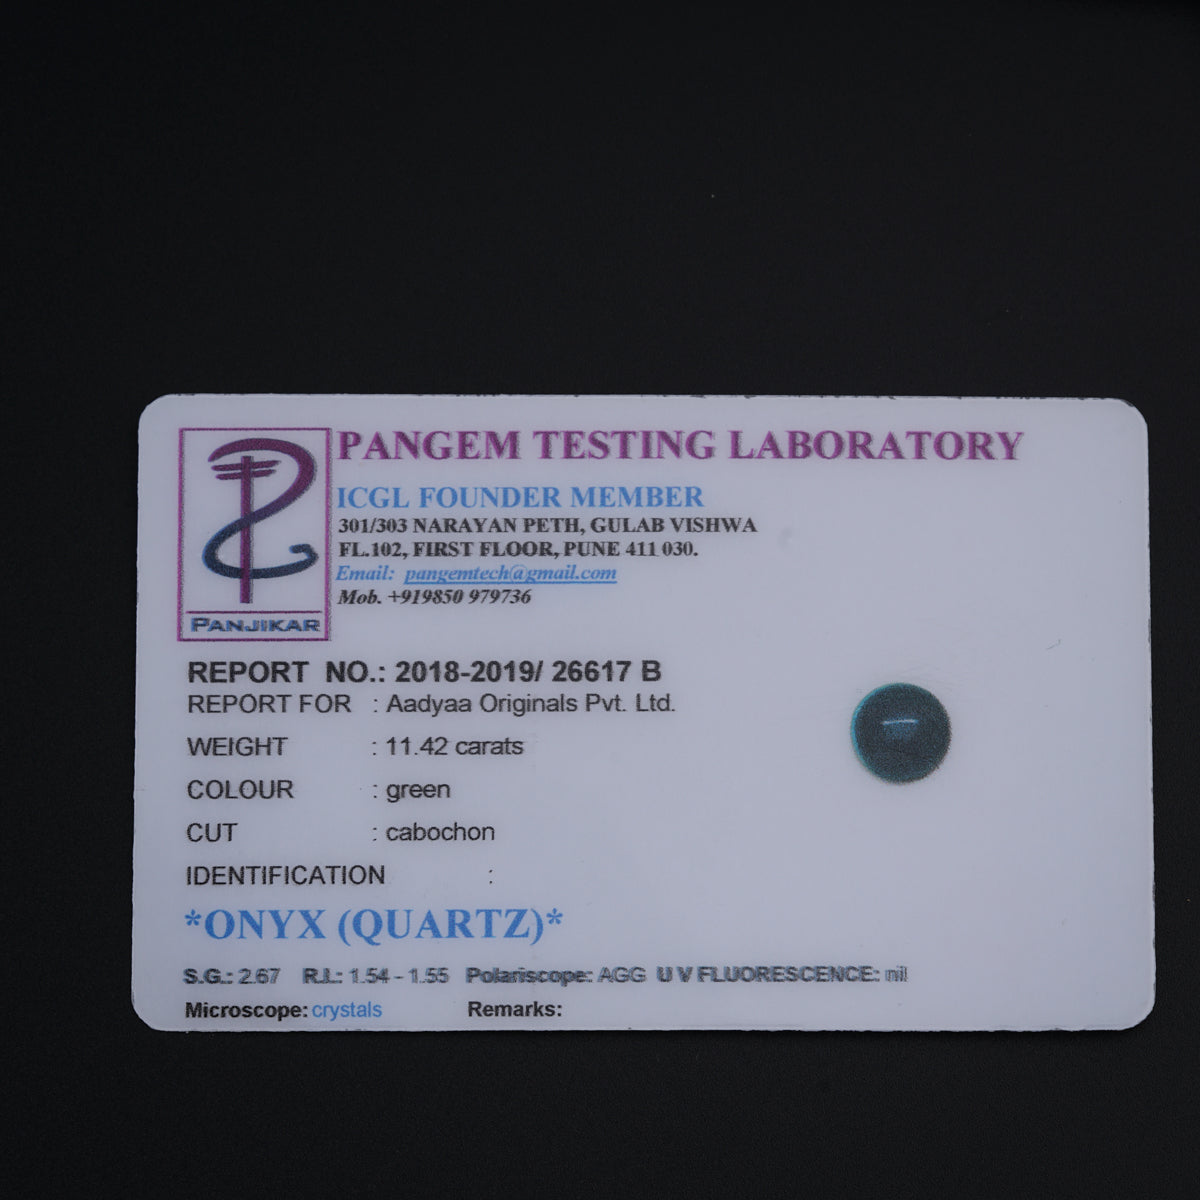 a tag on a black surface that says pangem testing laboratory